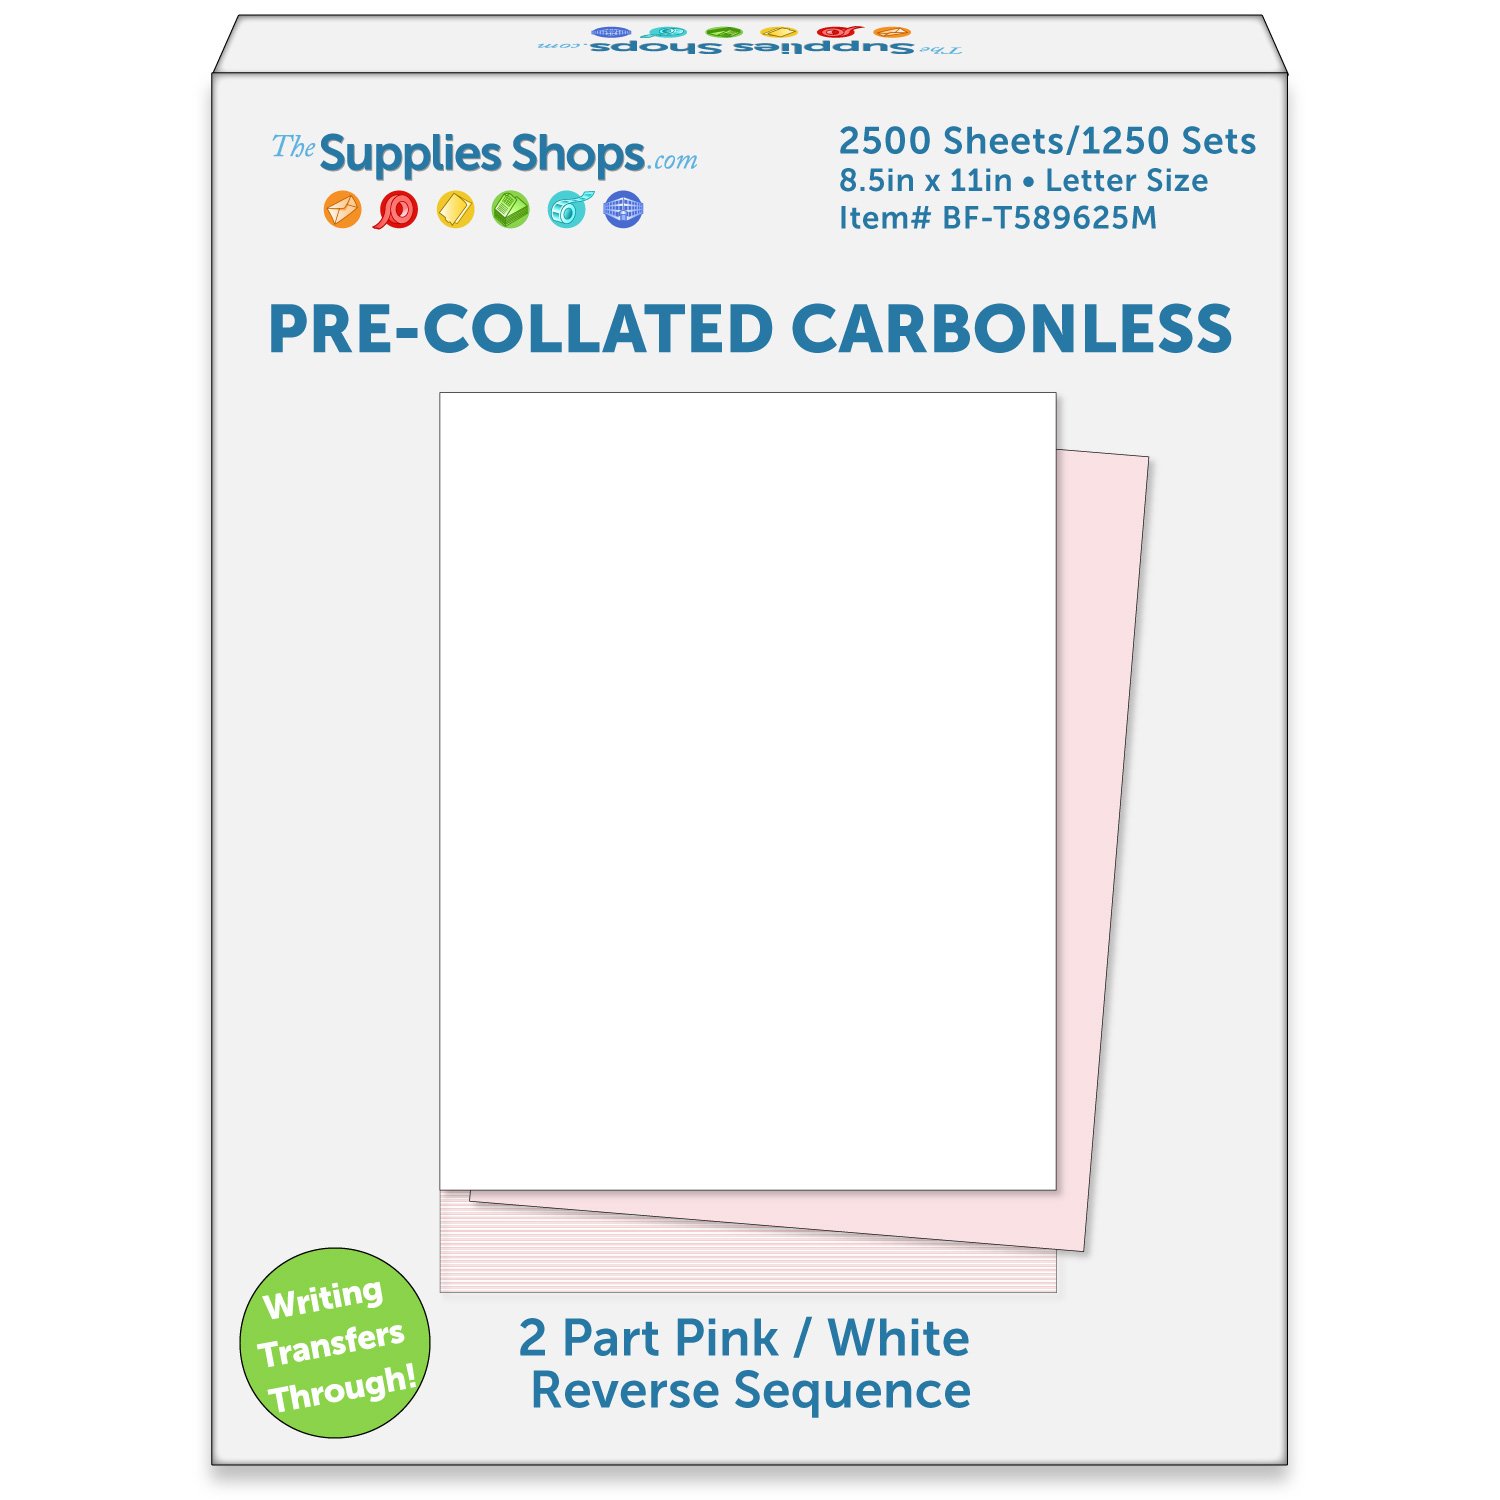 2-Part Reverse Sequence Pink / White Pre-Collated Carbonless Paper (Carton of 2500 Sheets)